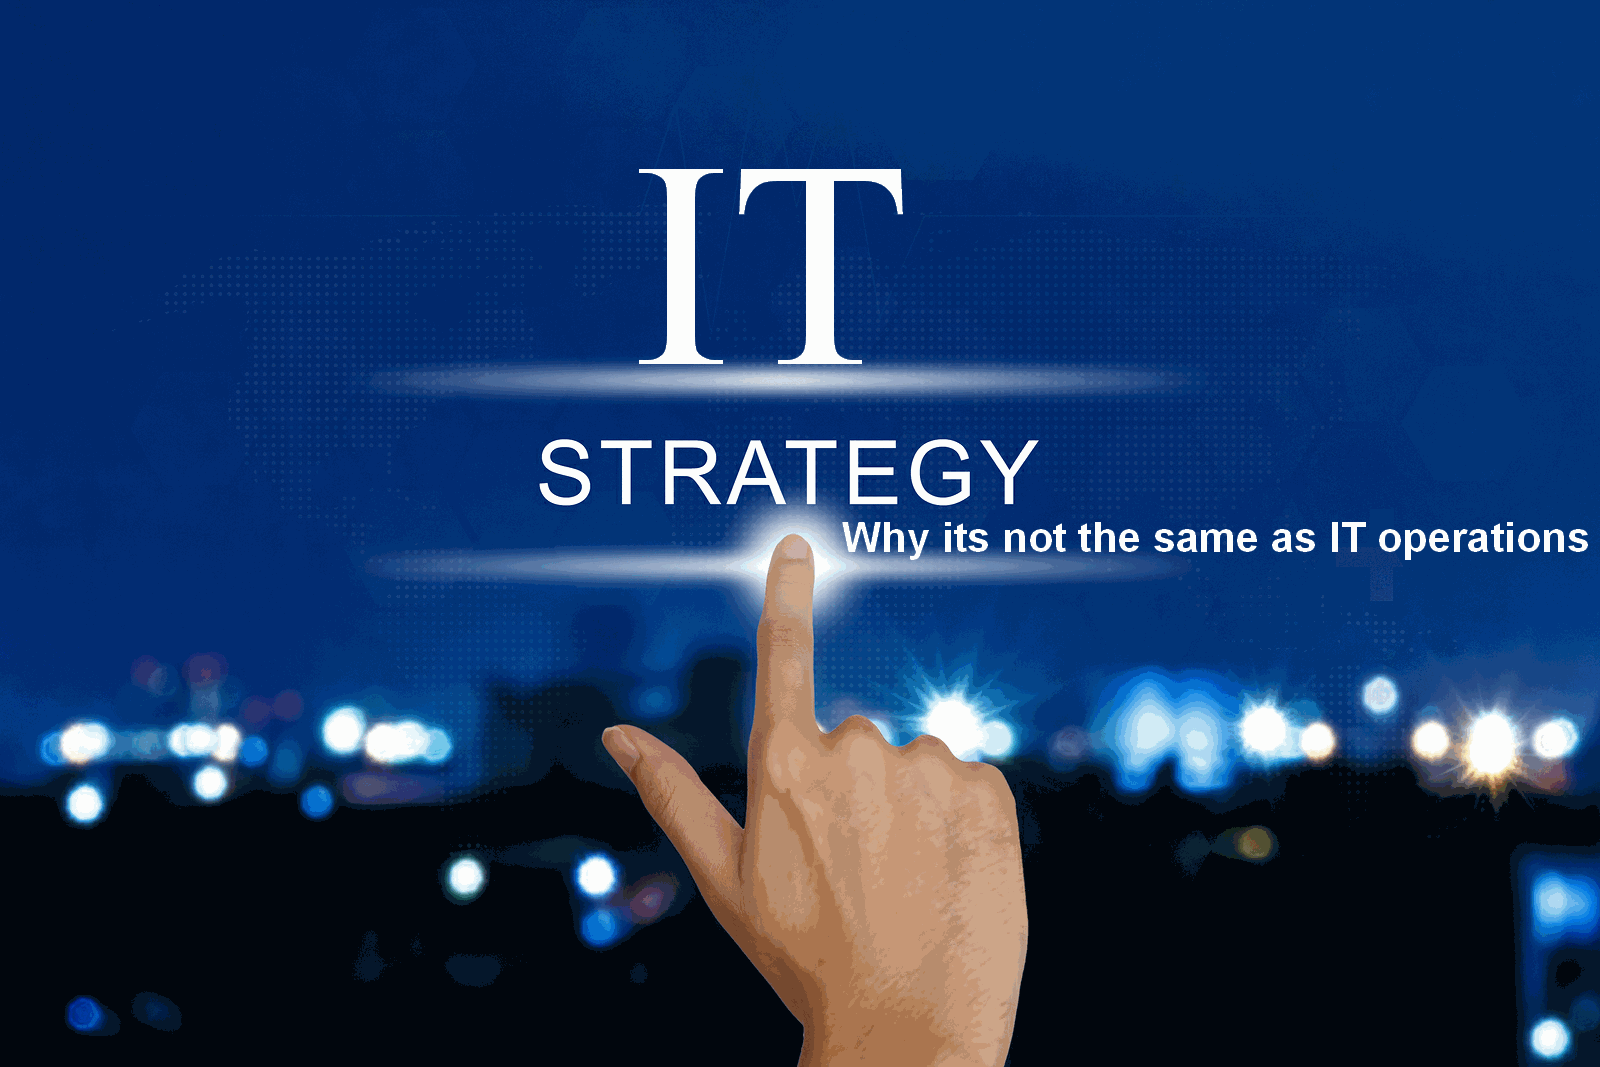 Strategic IT Management is not IT operations